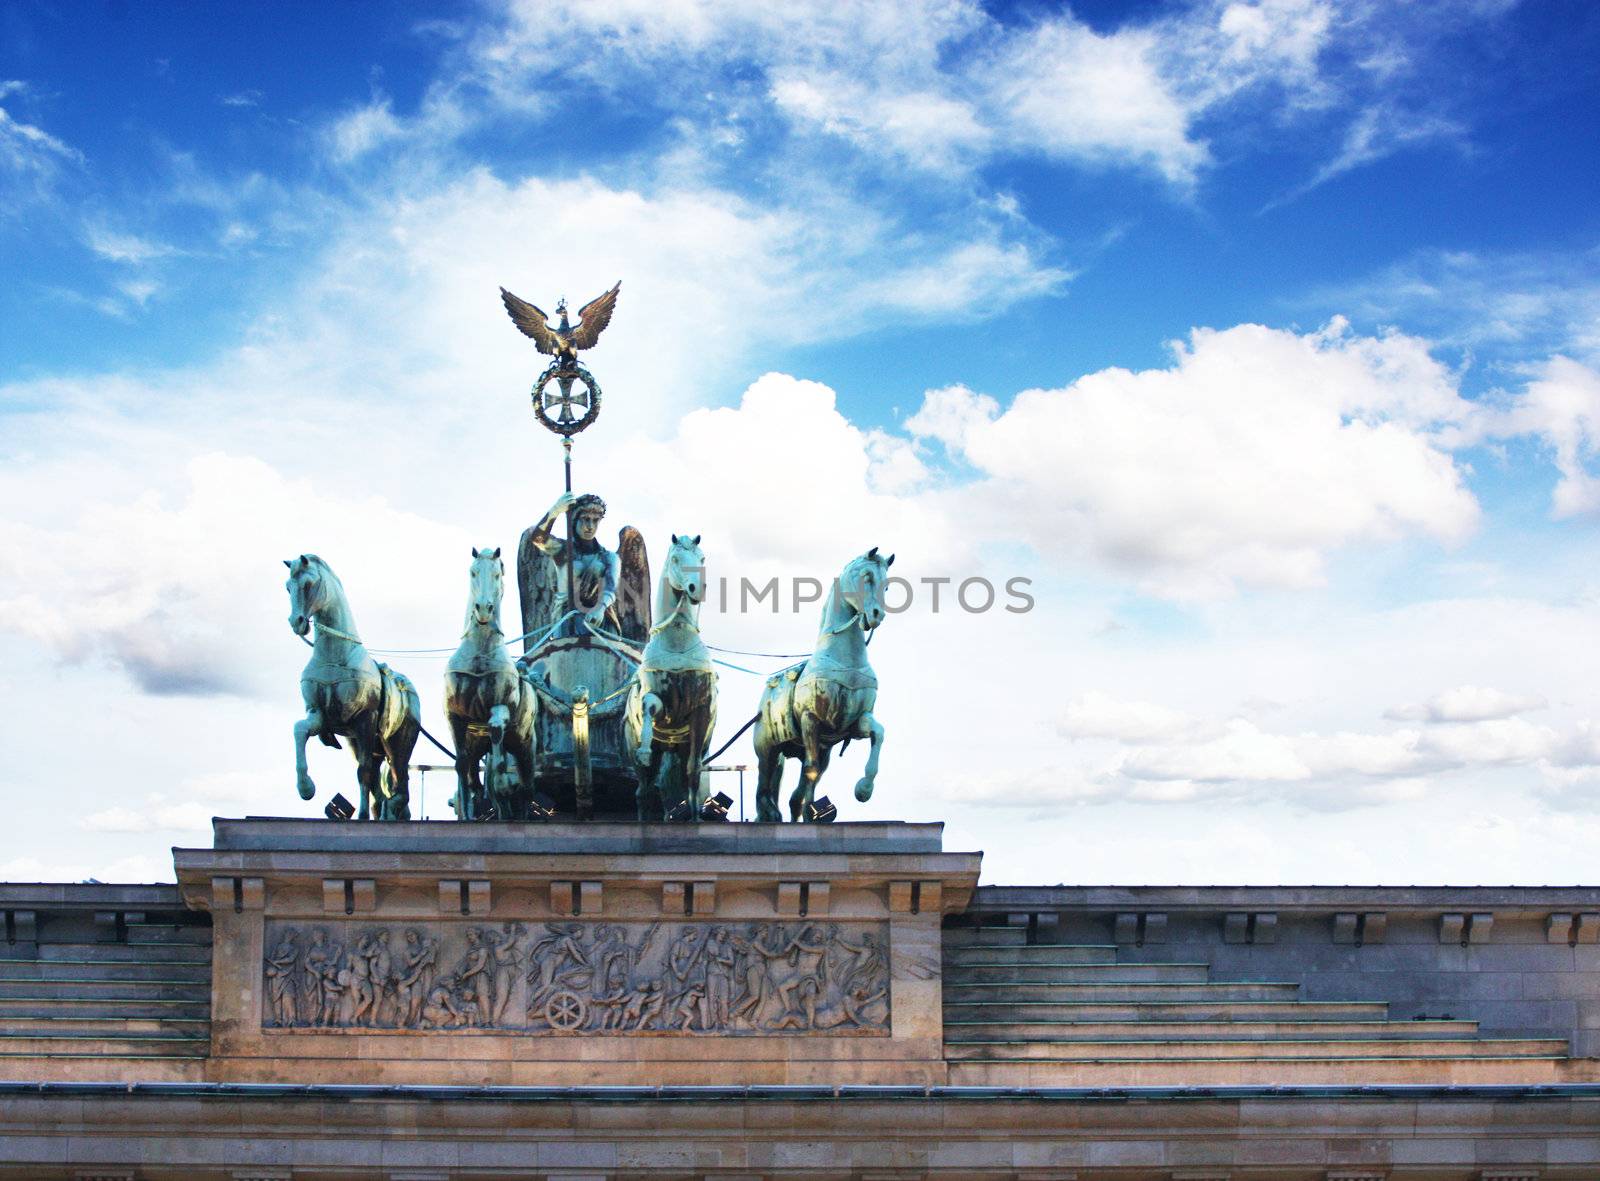 by traveling through Berlin by photochecker